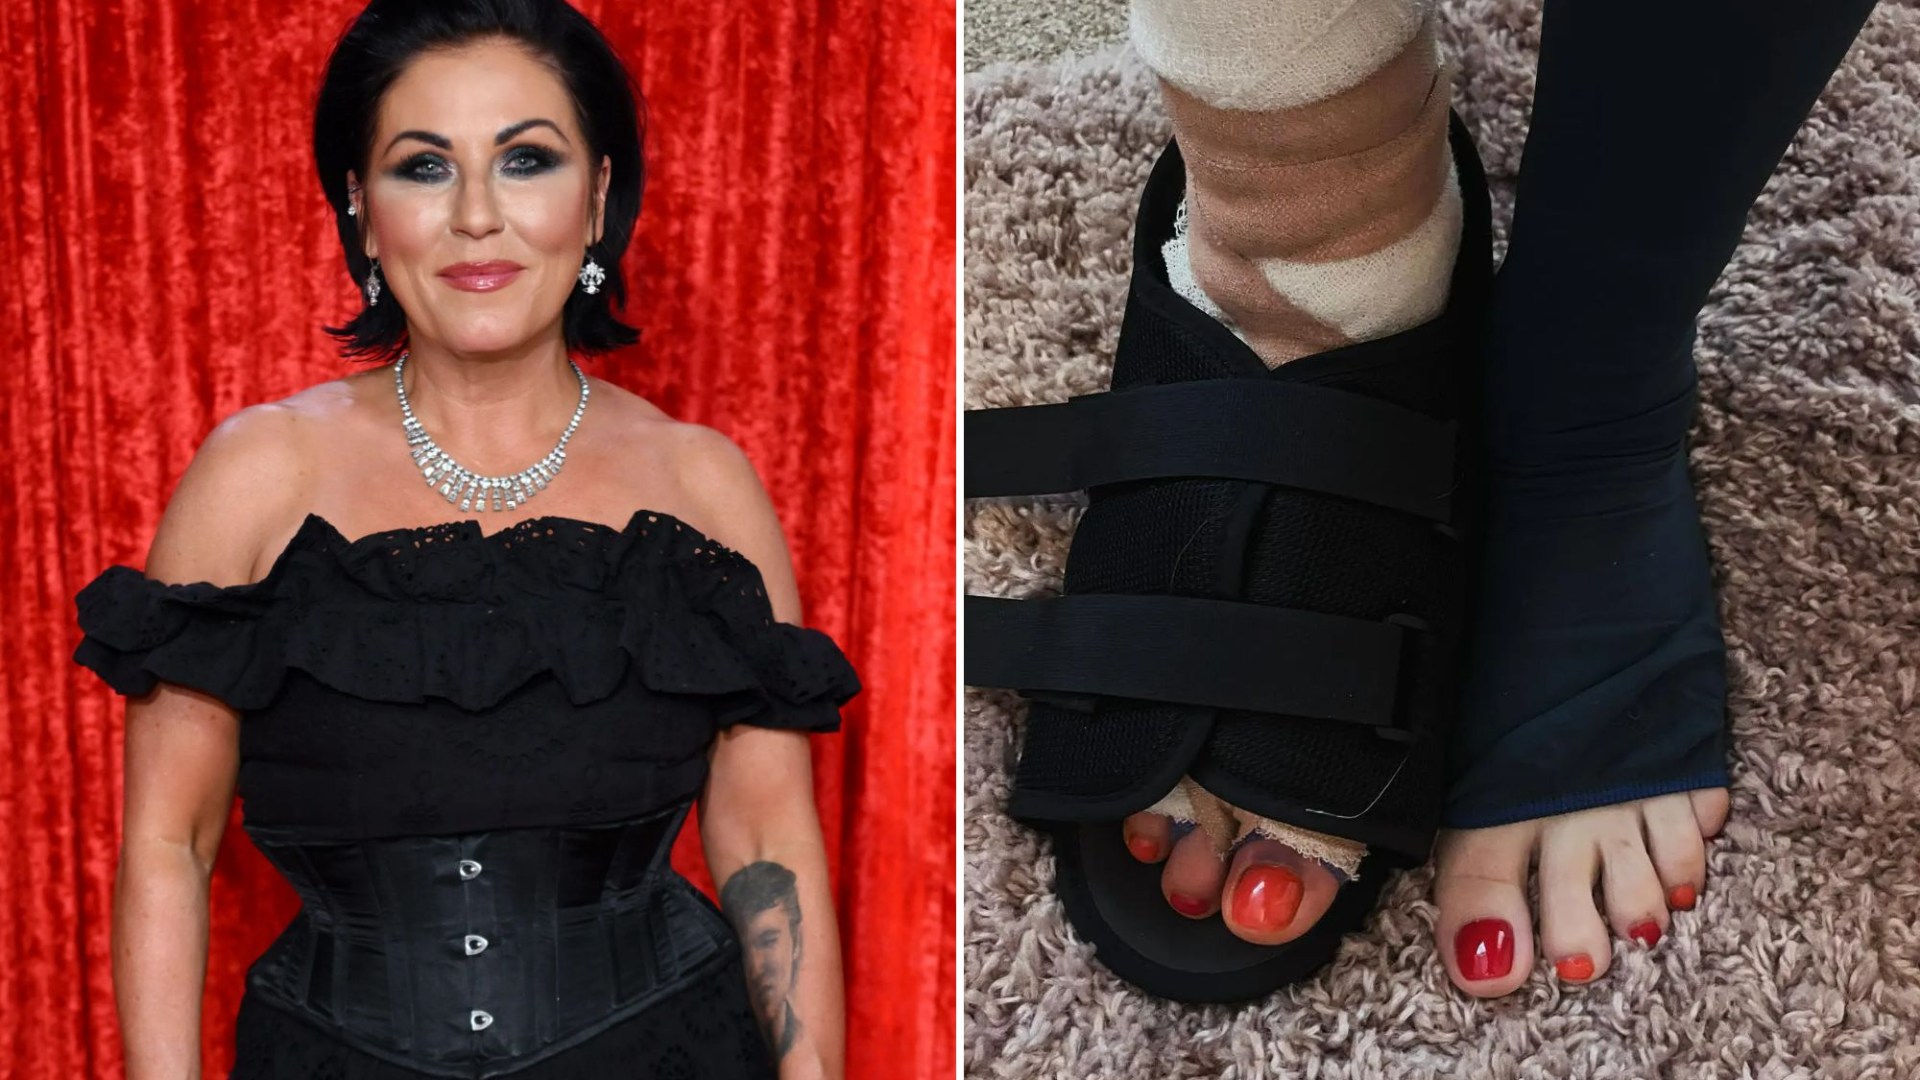 EastEnders star Jessie Wallace undergoes surgery after years of ‘excruciating pain’ [Video]